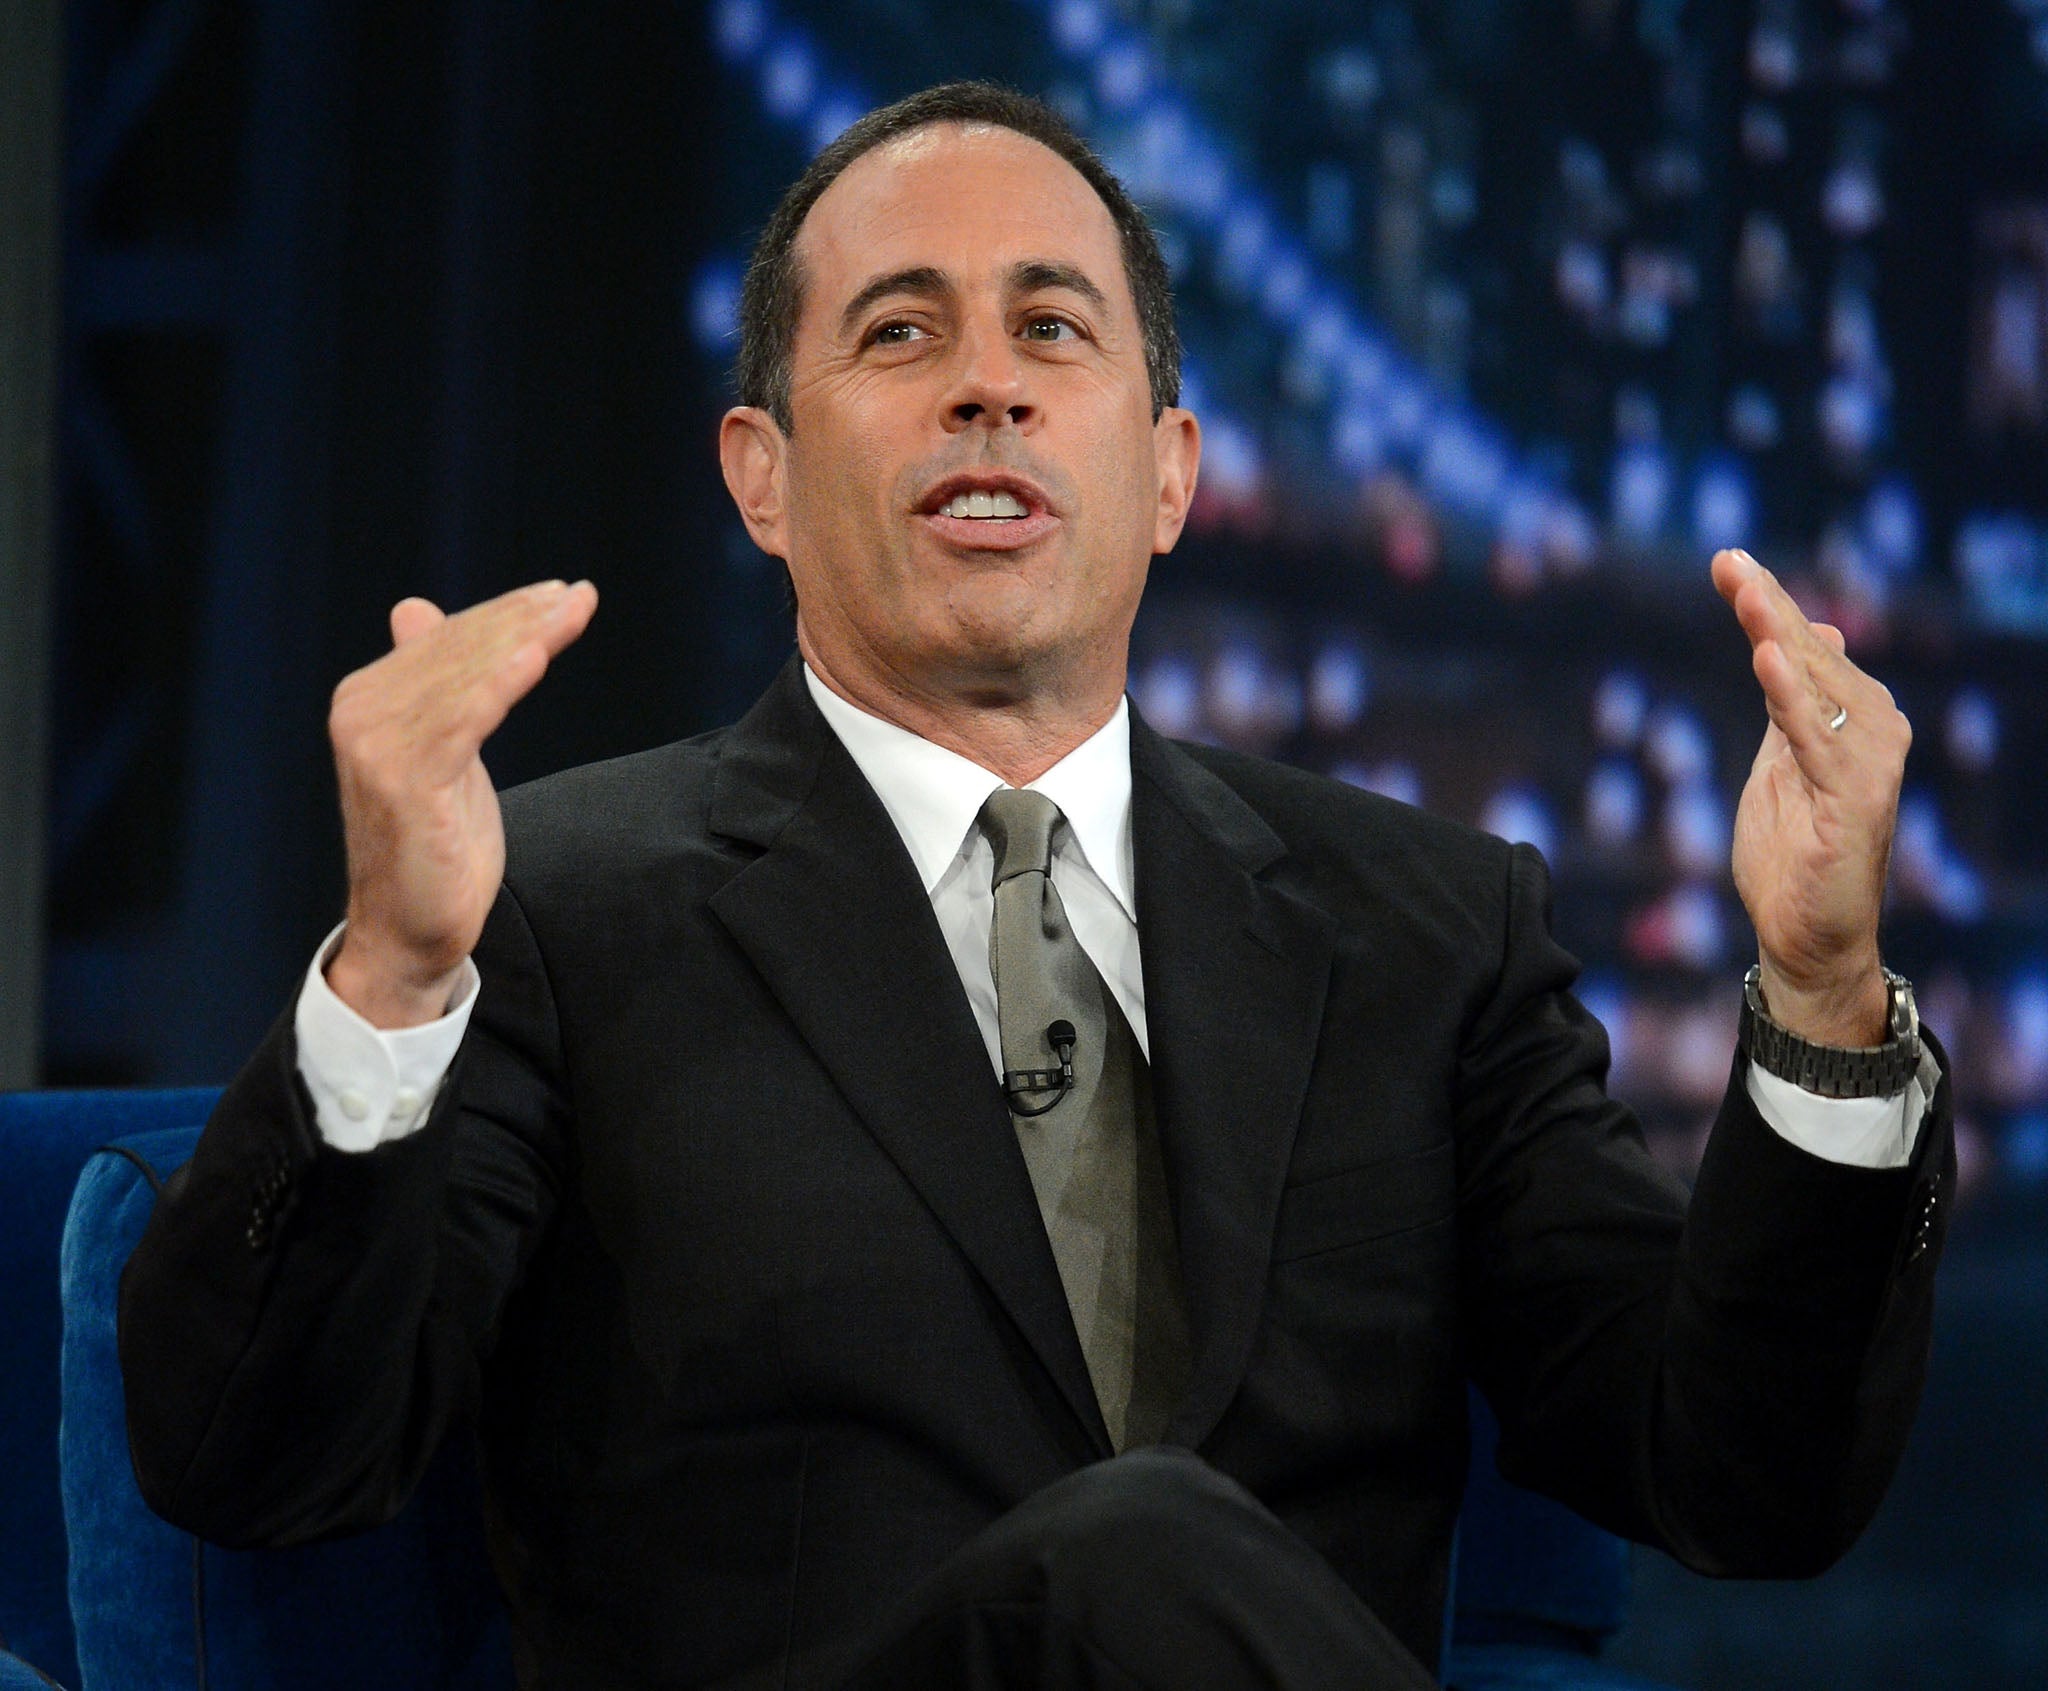 Jerry Seinfeld has collaborated with Wale on his new album